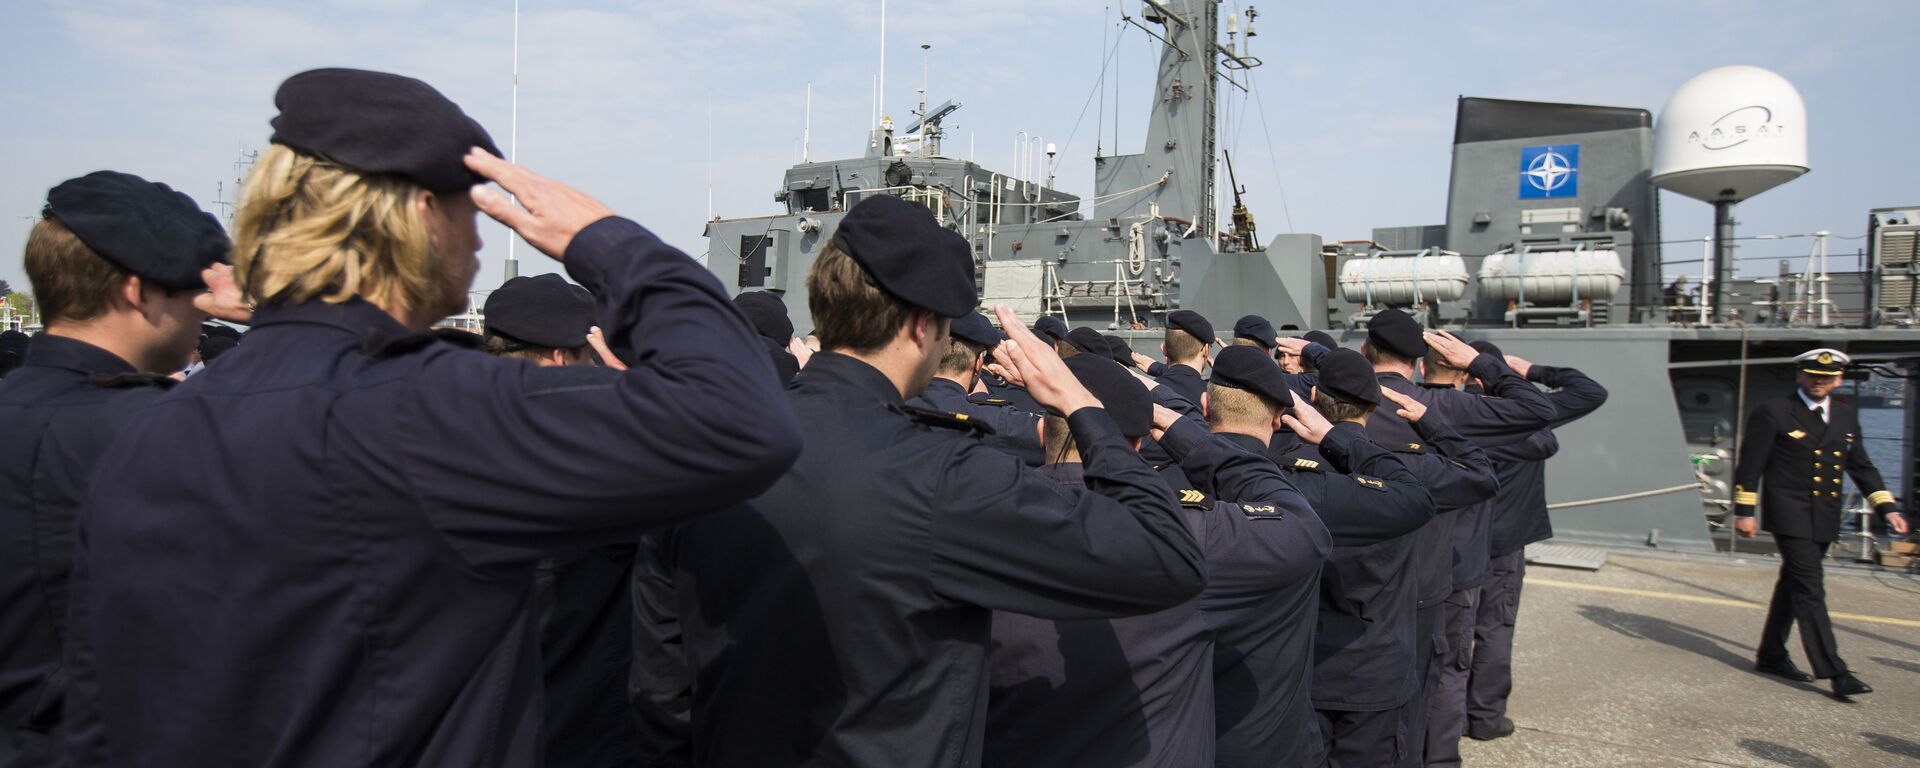 Crew members of Norwegian minesweeper Otra salute after a briefing of NATO Allied Maritime Command Deputy Chief of Staff for Operations, Commodore Arian Minderhoud, right, of the Royal Netherlands Navy before setting sail together in a convoy of five ships of Norway, Belgium, the Netherlands and Estonia from Kiel, Germany, Tuesday, April 22, 2014 - Sputnik International, 1920, 14.06.2021